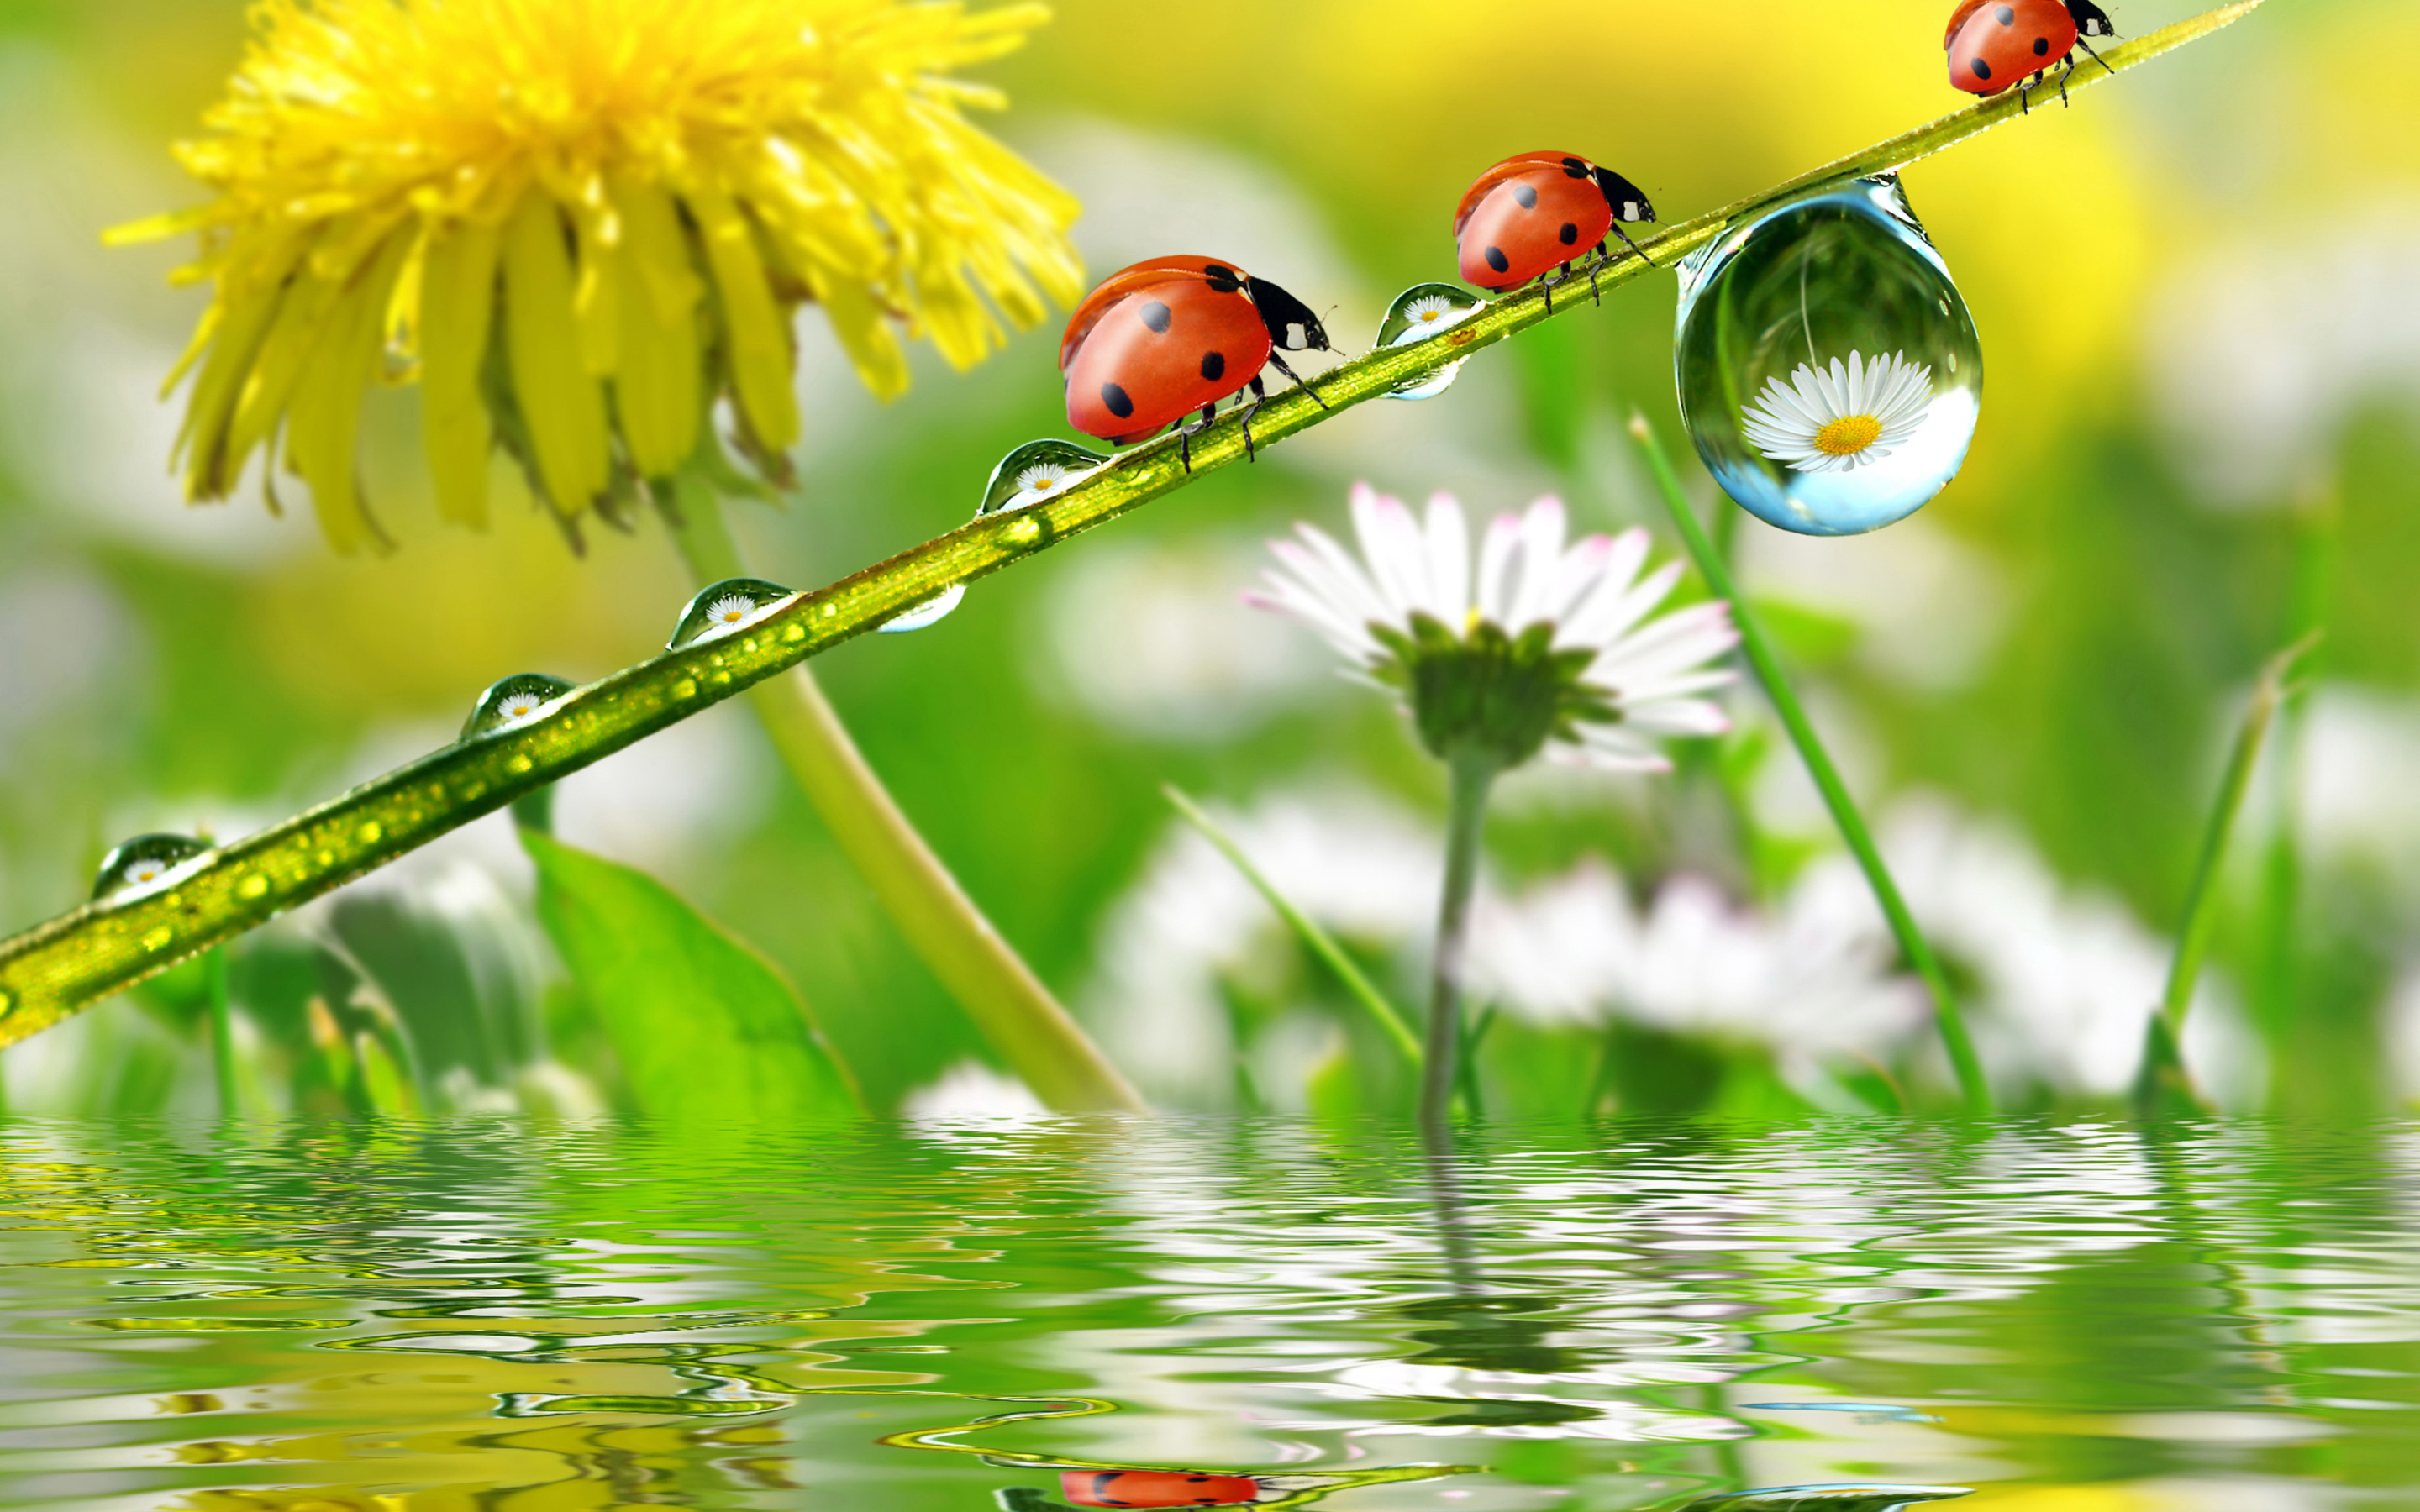 Nature Dandelion Chamomile Insect Ladybug Spring Rain Drops Water Desktop Hd  Wallpapers For Mobile Phones And Computer 2880x1800 : 